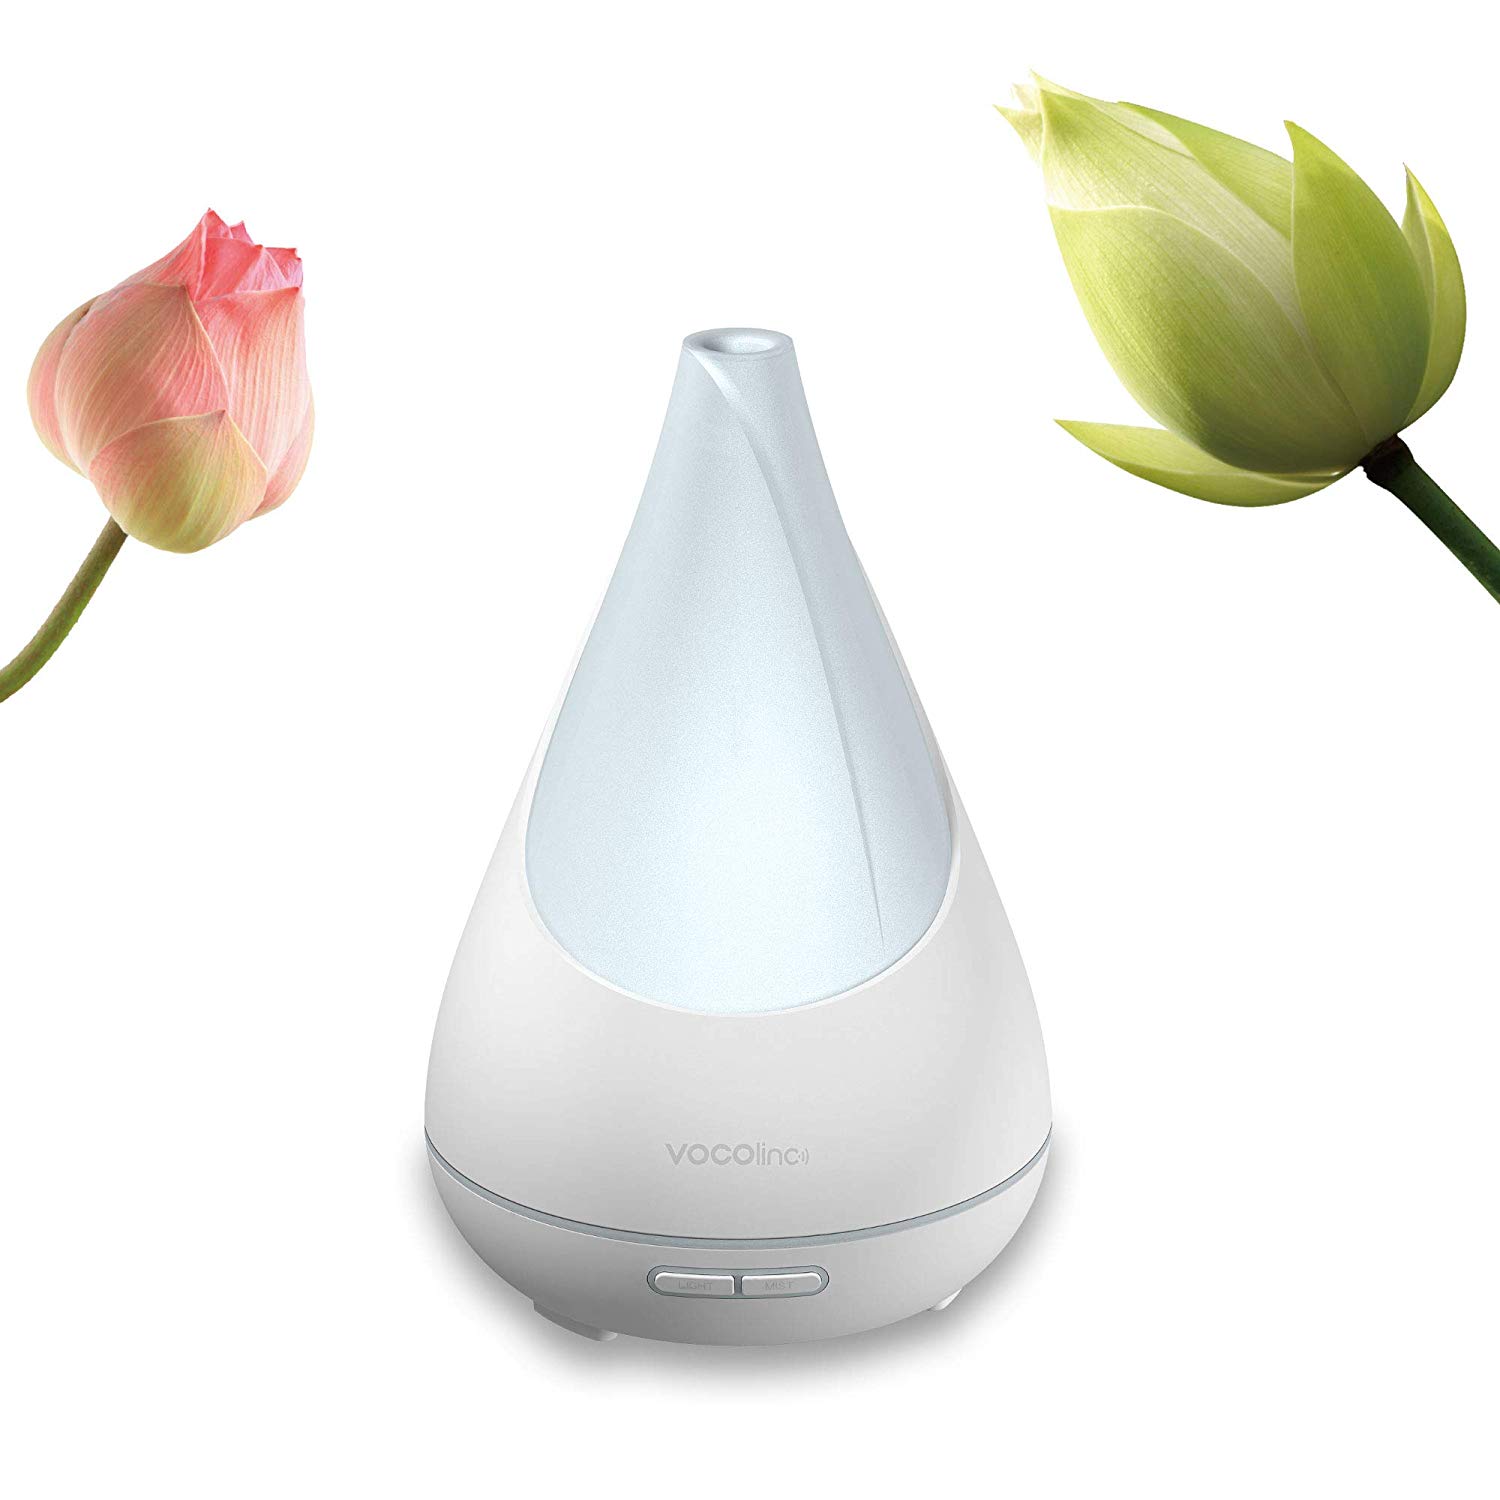 Vocolinc essential oil diffuser helps with mental health and breathing when it's dry indoors.